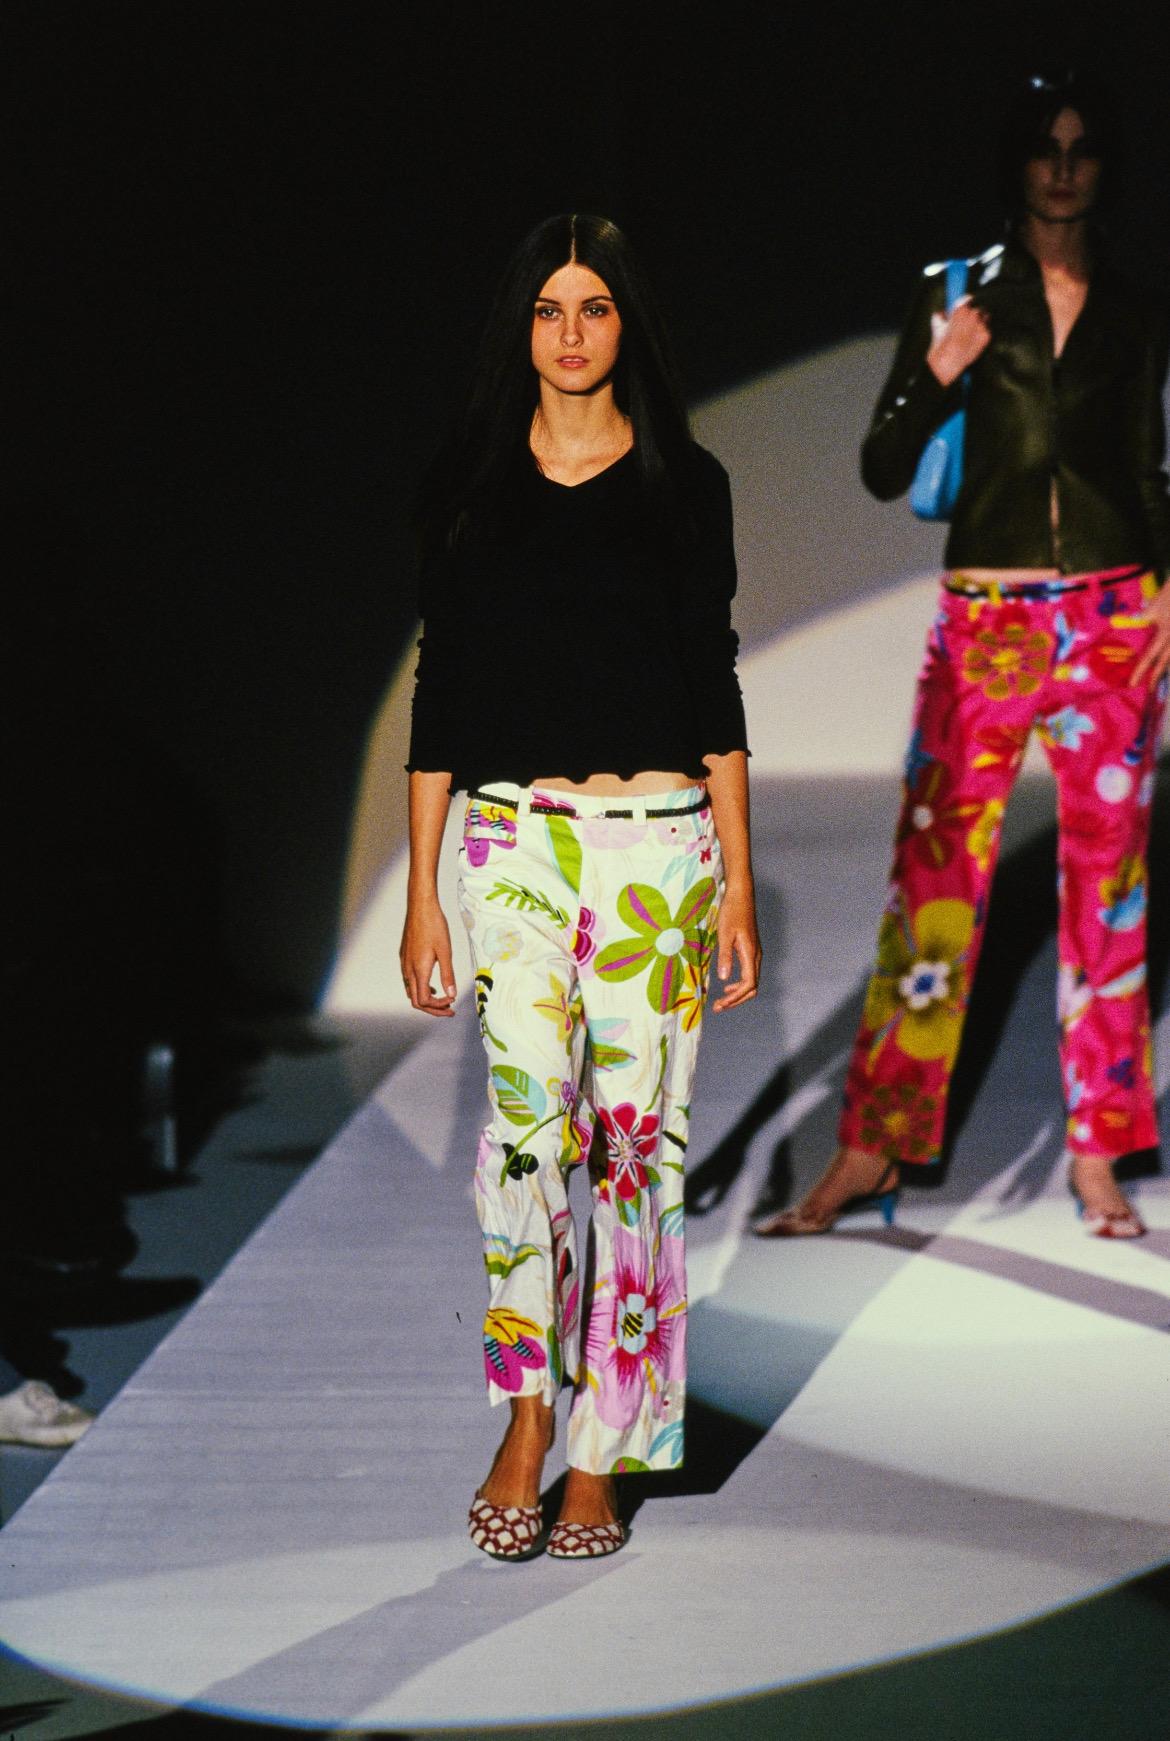 Presenting a pair of incredible vibrant white floral Gucci pants, designed by Tom Ford. From the Spring/Summer 1999 collection, these stunning pants debuted on the season's runway as part of look 6, modeled by Trish Goff, and in the season's ad